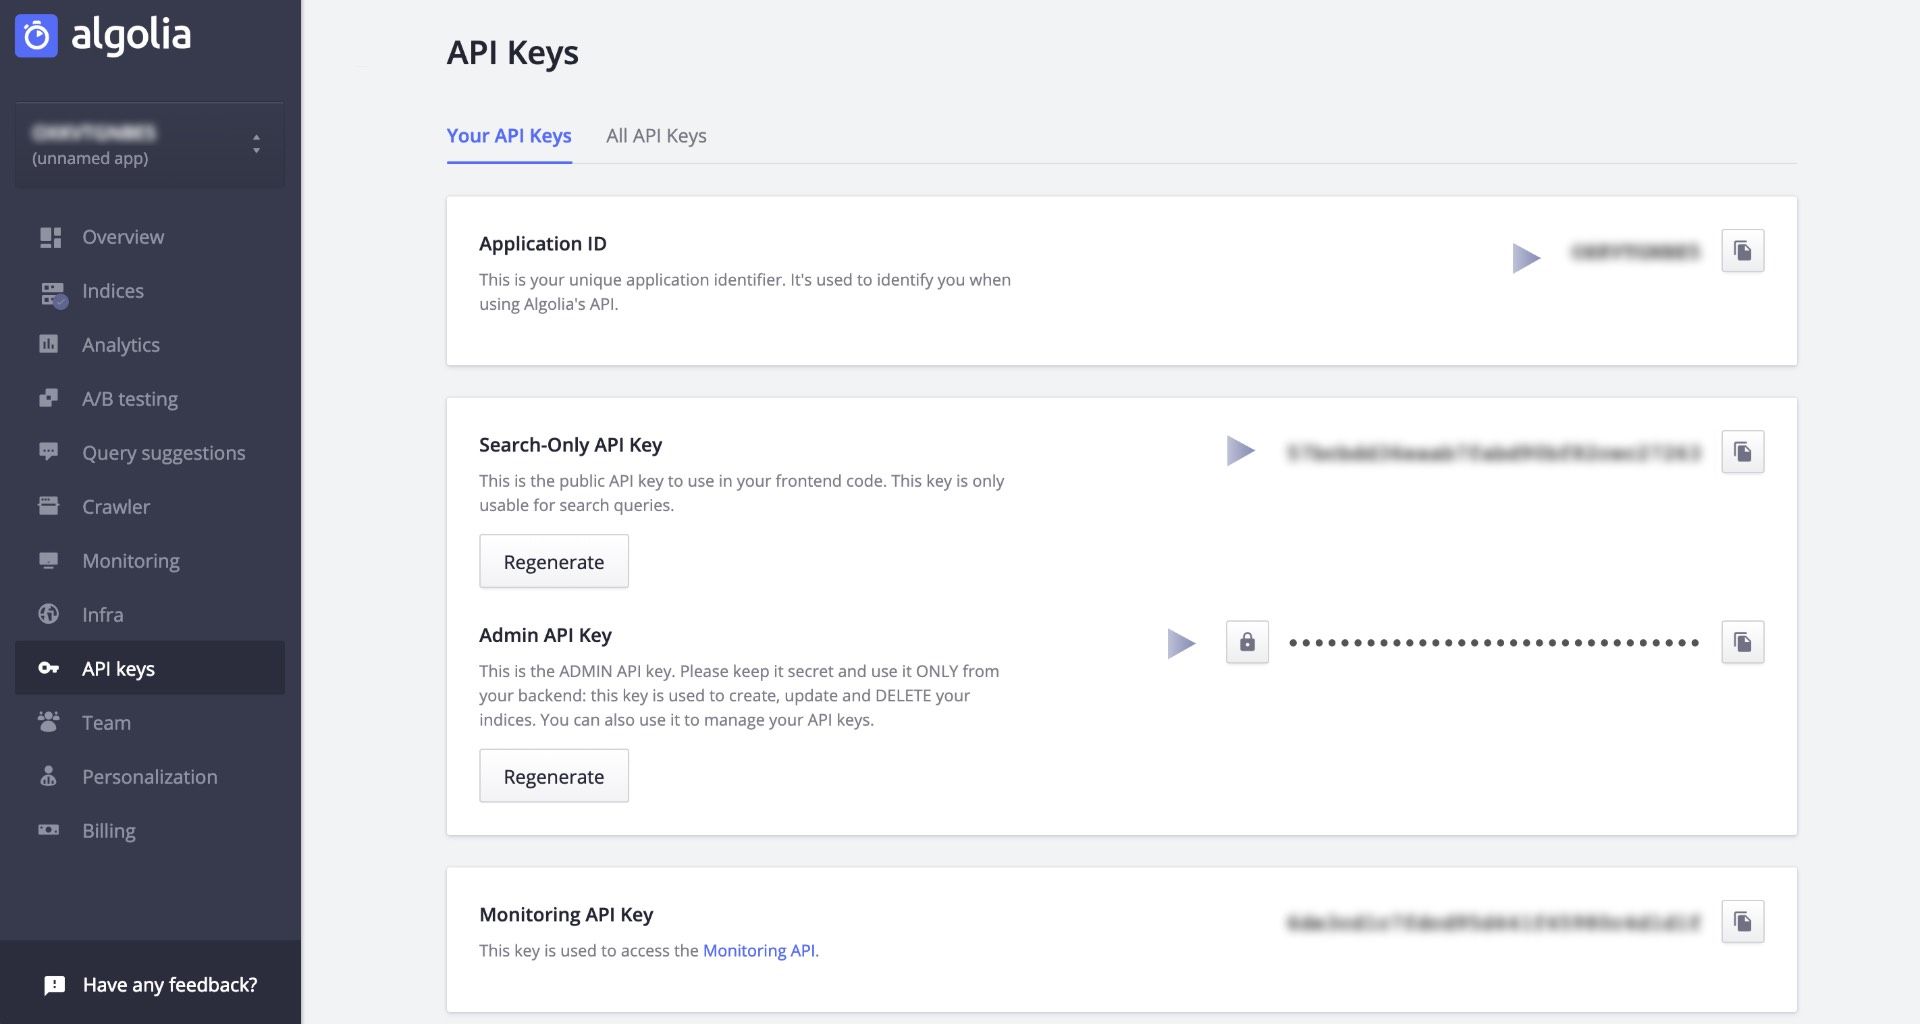 The API key section of your Algolia dashboard